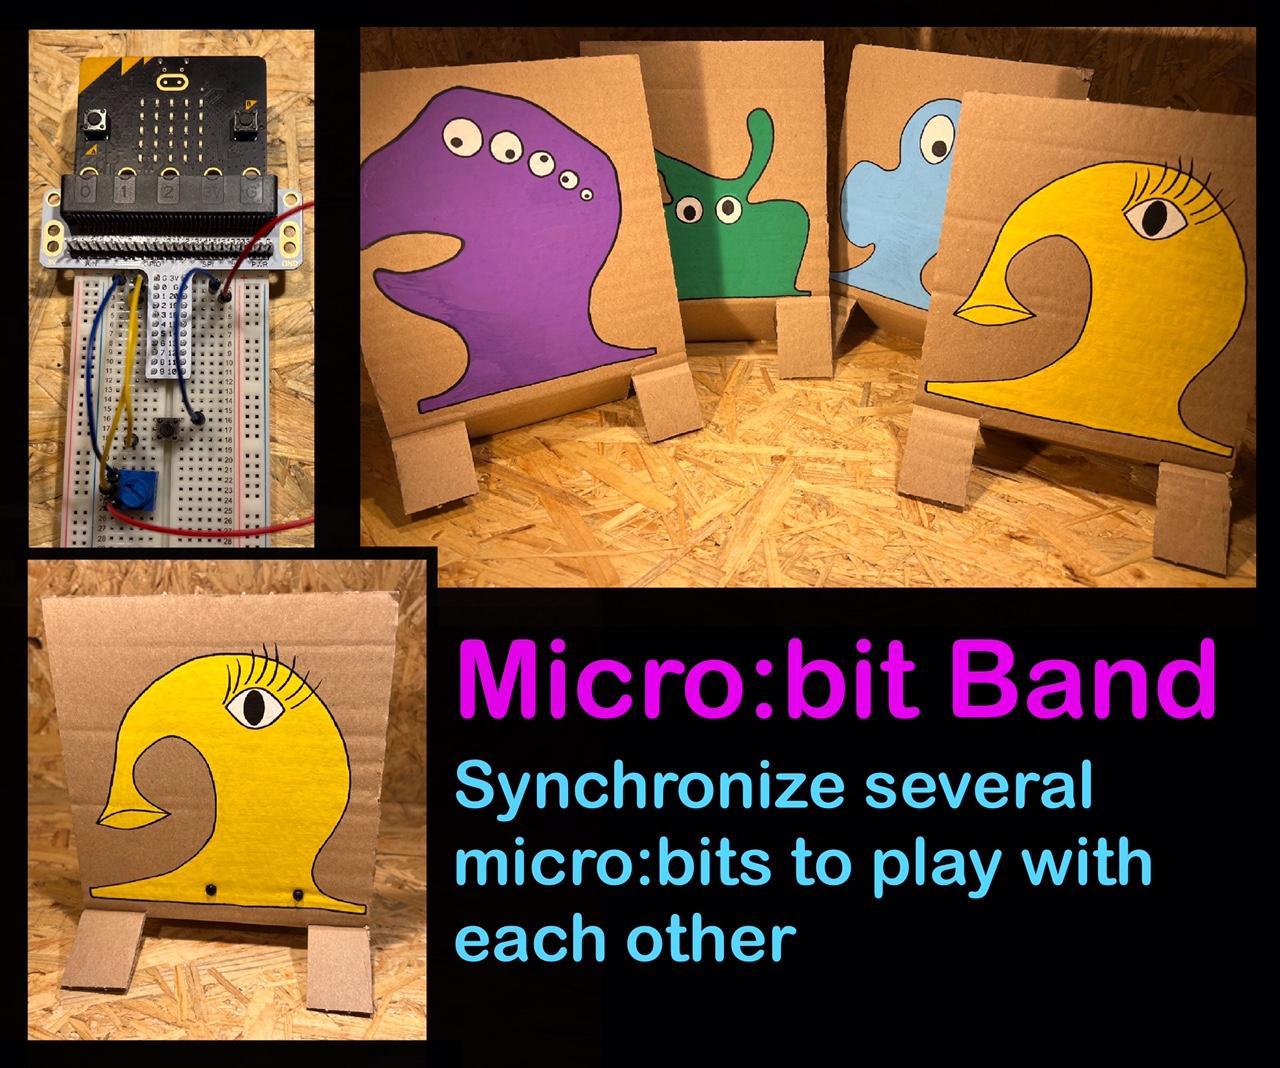 The Micro:bit Monster Band